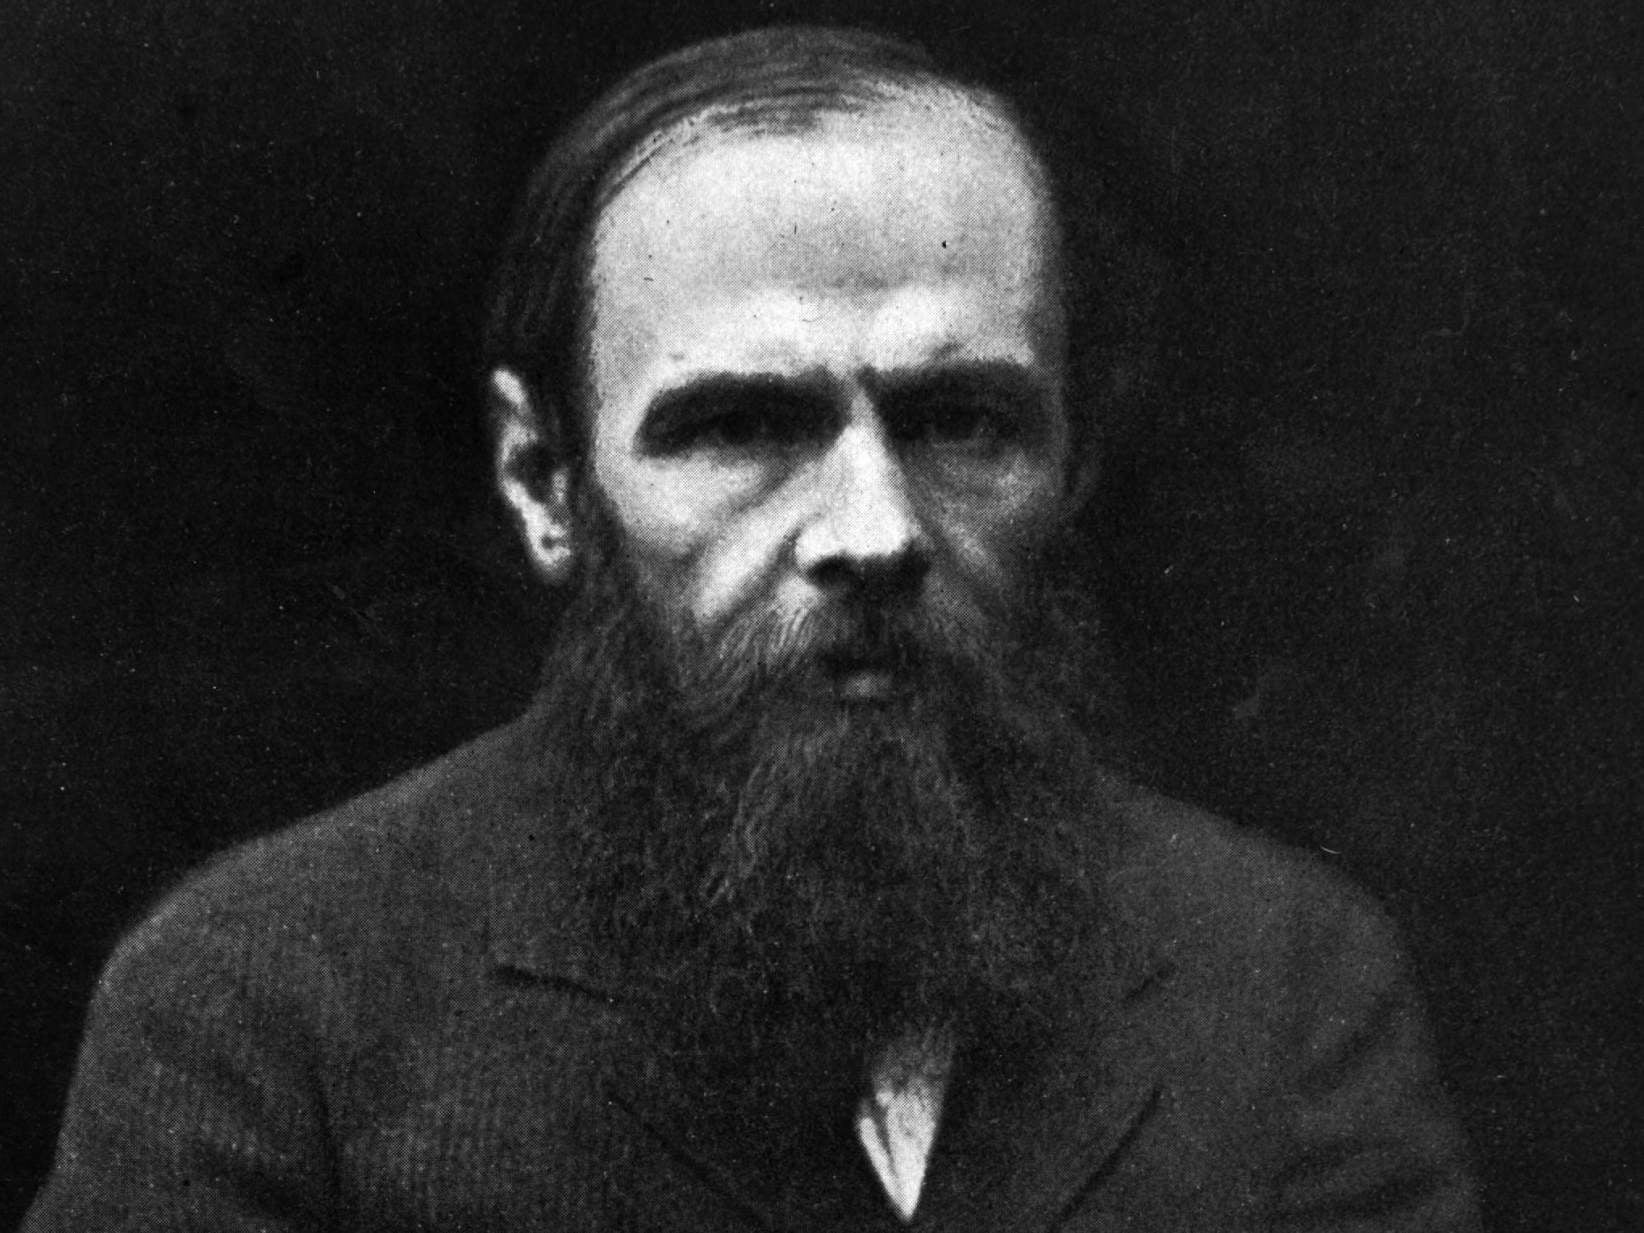 Kafka judged it correctly in arguing that Dostoevsky’s characters are not all lunatics – just ‘incidentally mad’, like the rest of us